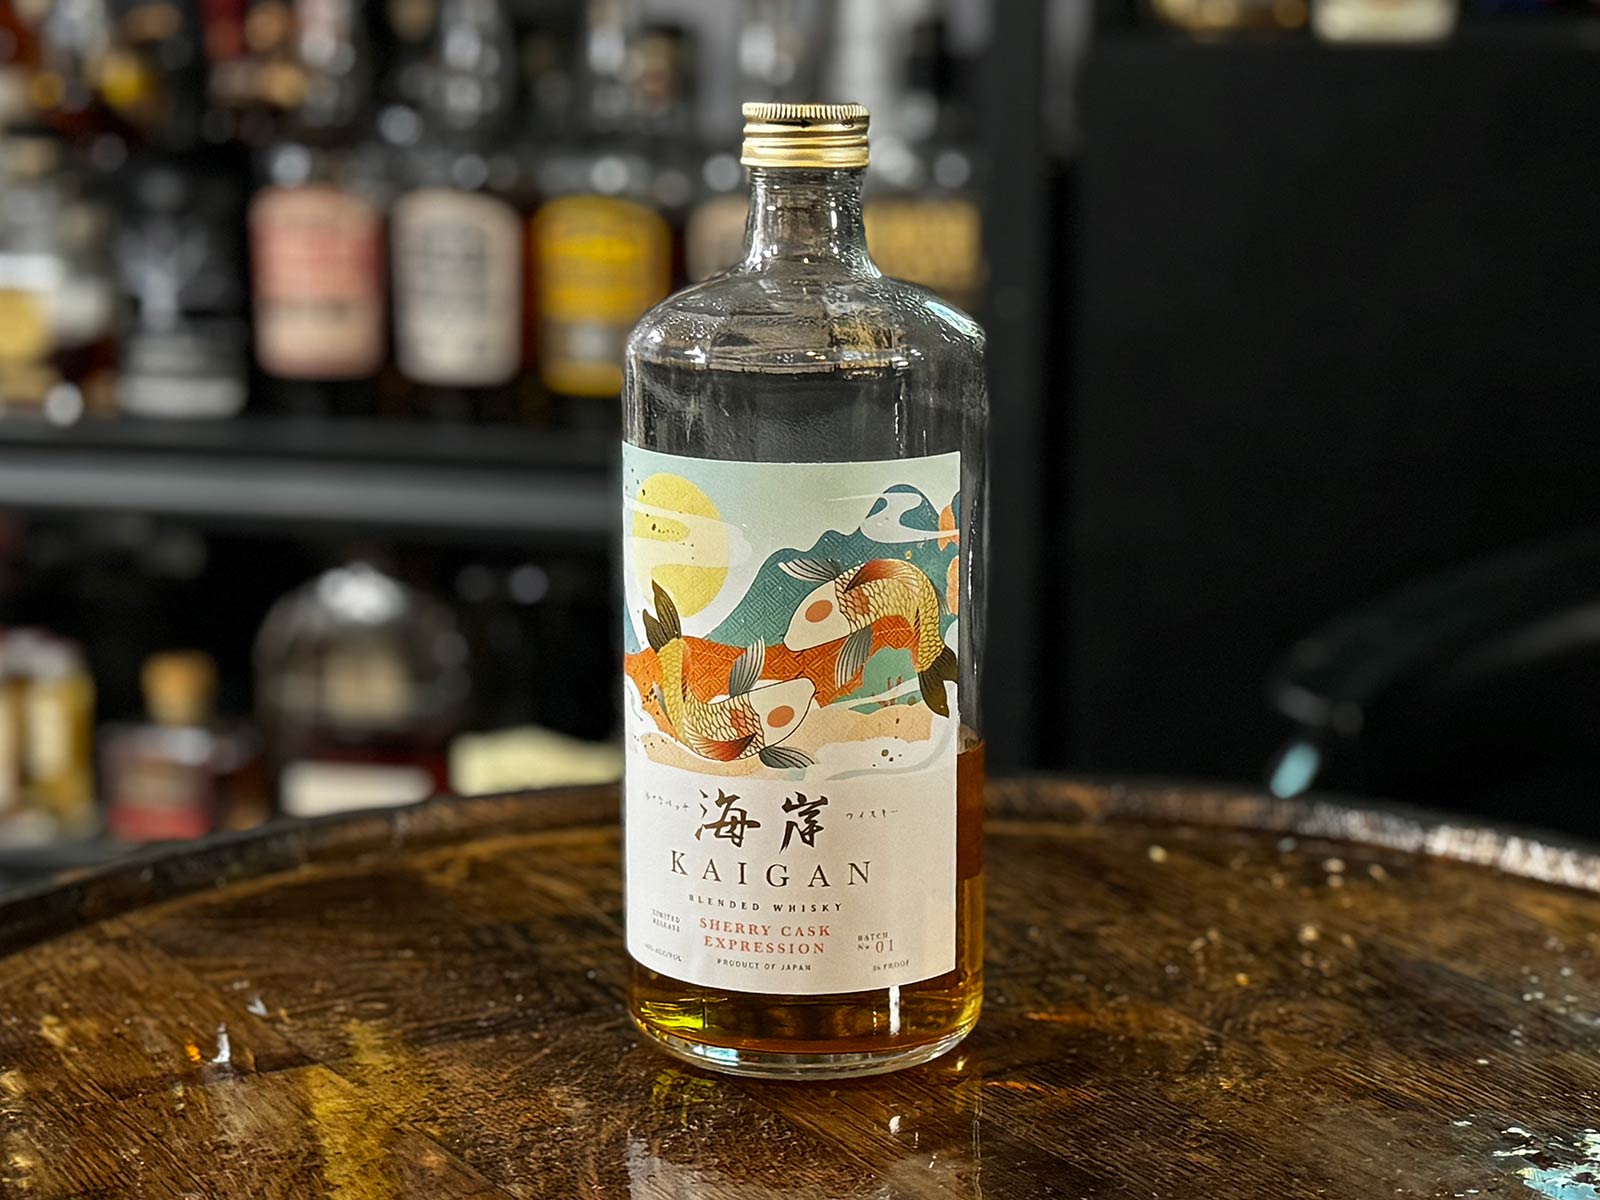 Kaigan Sherry Cask Expression Japanese Whisky